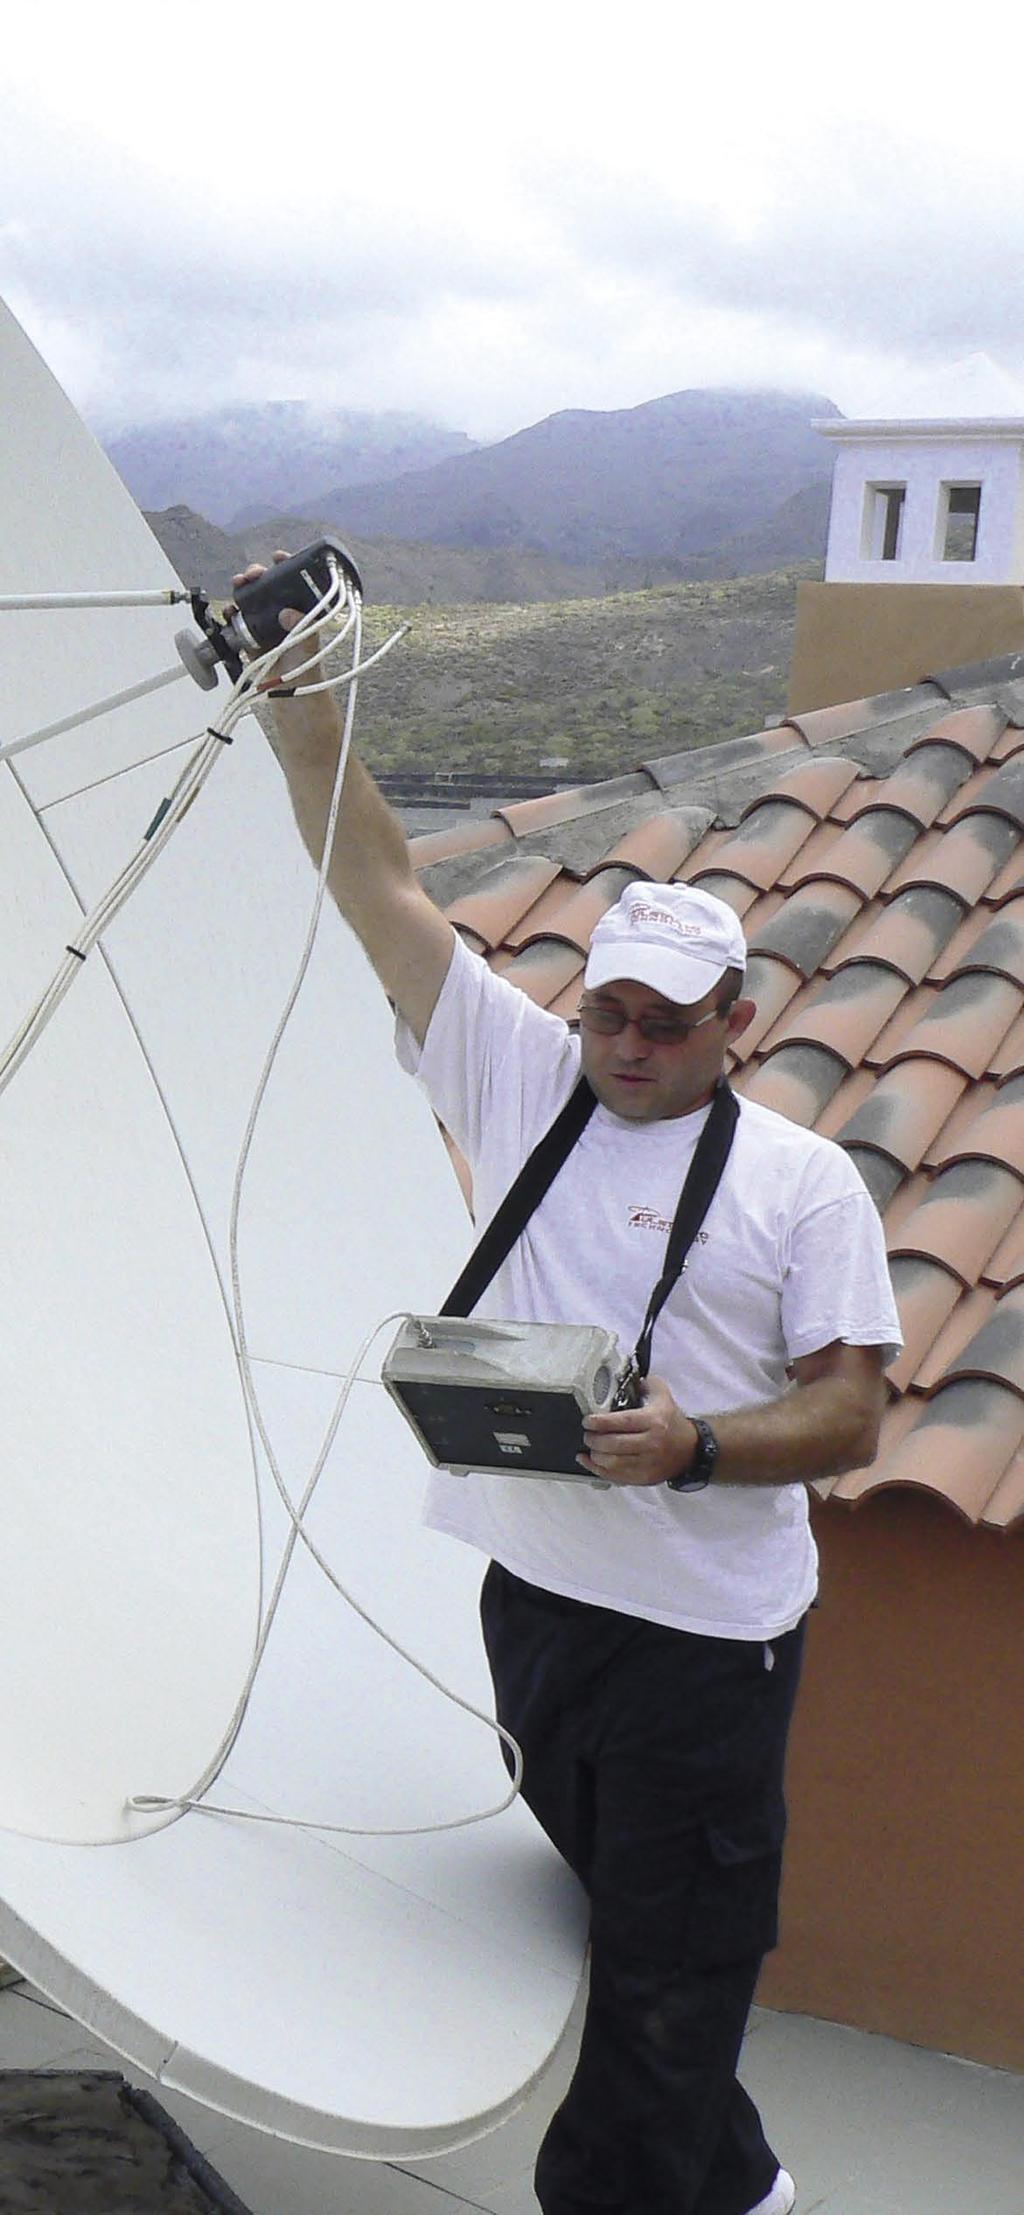 acquired his first satellite system: It was an 80cm system for HISPASAT reception. Back then I could receive two channels from Brazil TV Record and Tango TV.